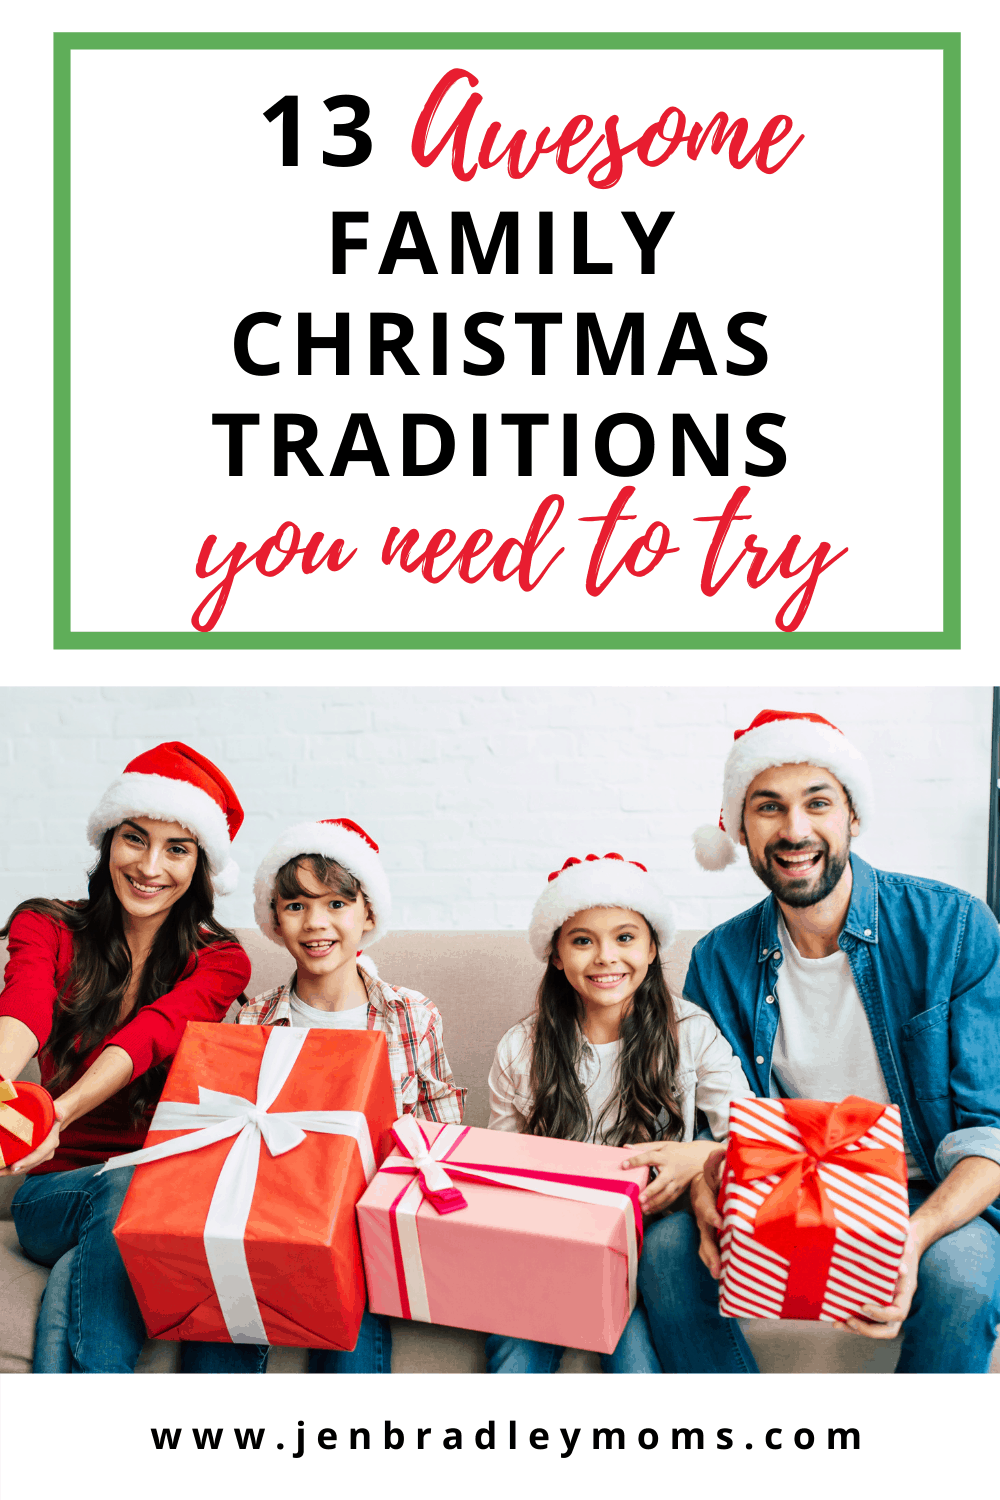 13 Awesome Christmas Traditions for Families You Must Try